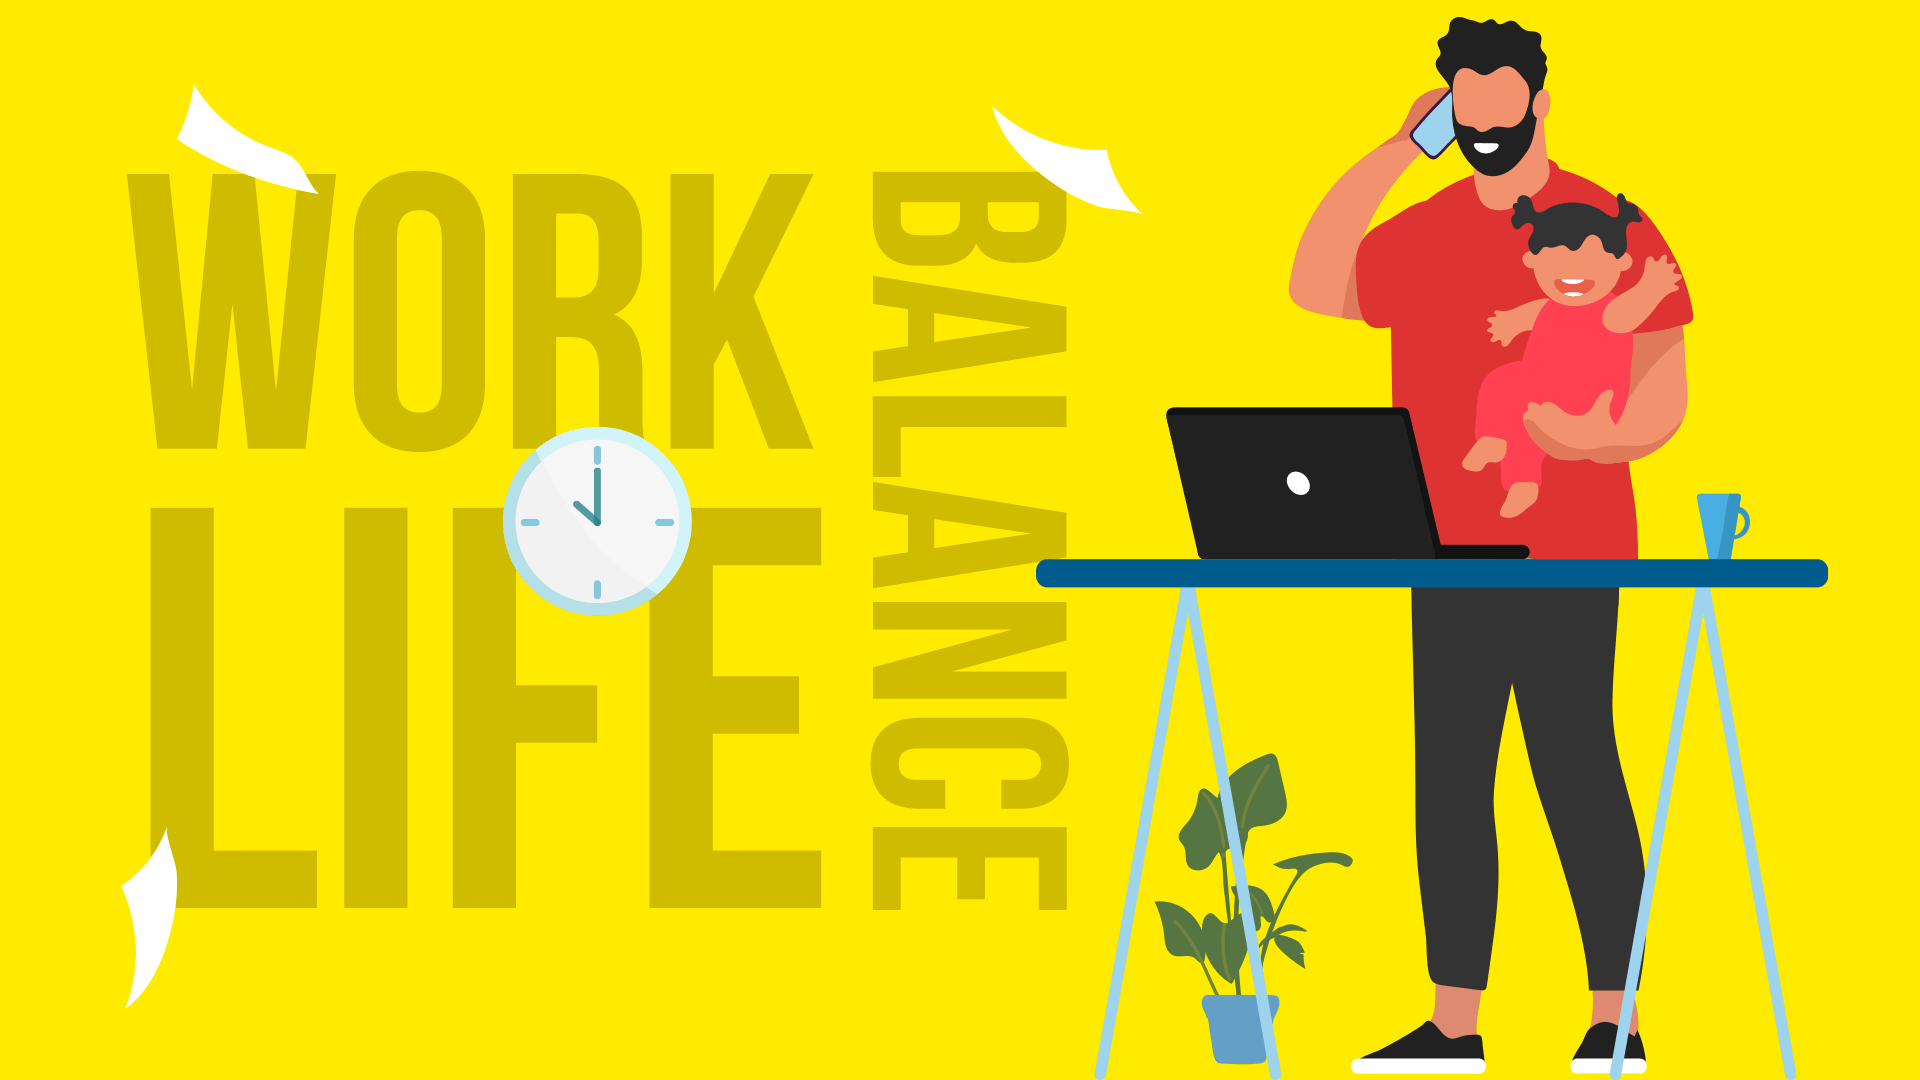 Working remotely: finding balance between working hours and private life